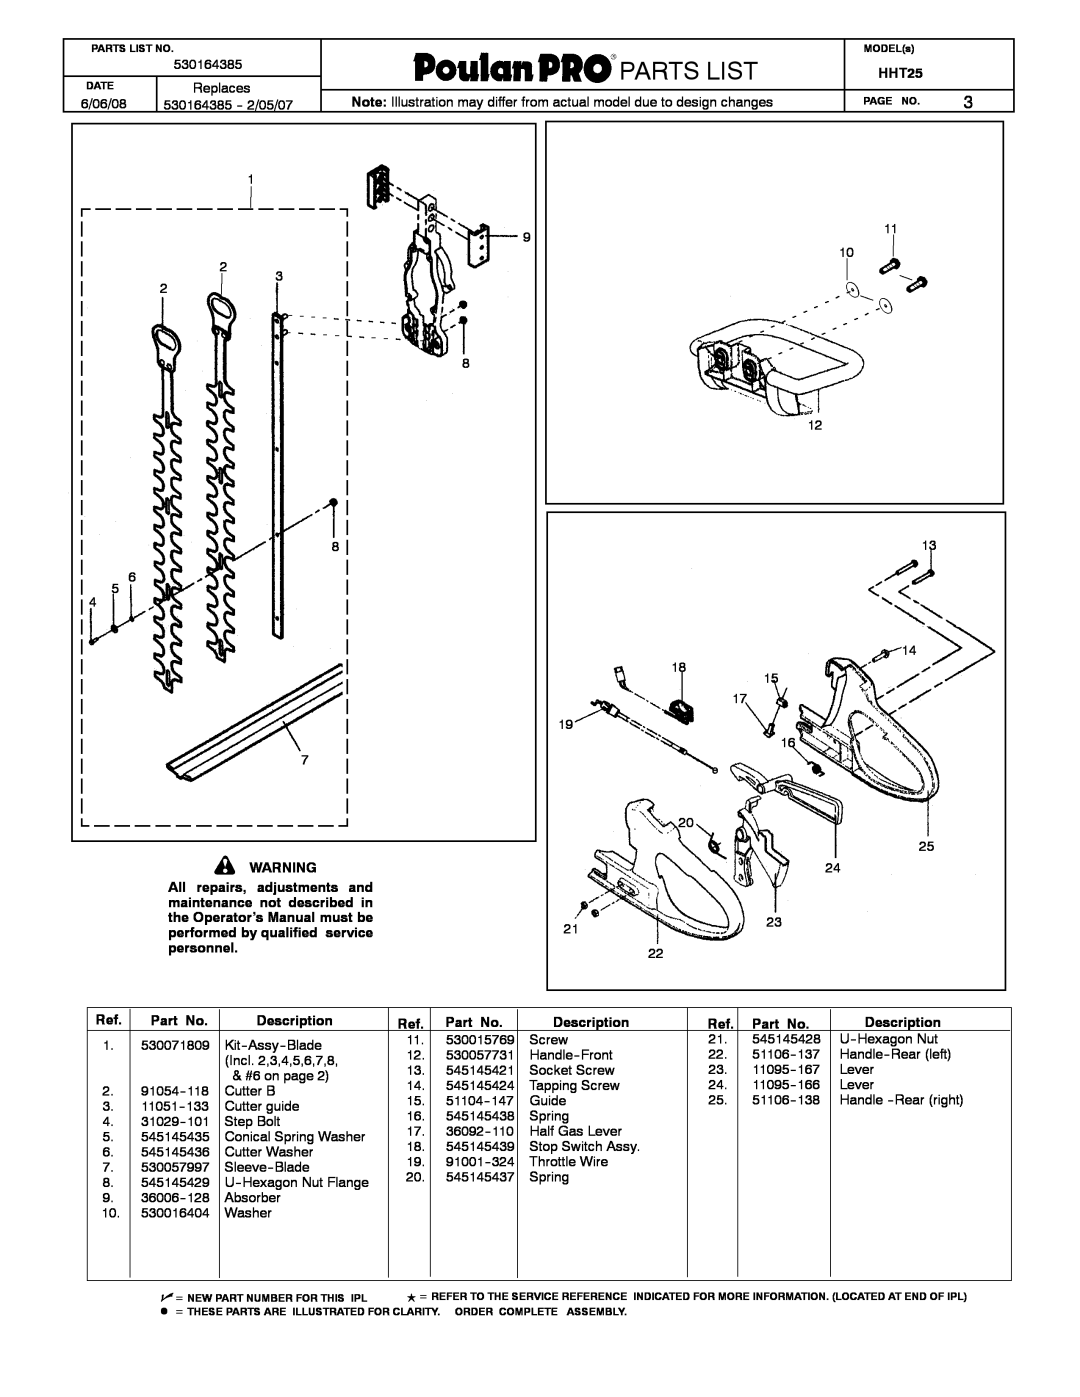 Poulan HHT25, 530164385 Parts List, Note Illustration may differ from actual model due to design changes, Description 